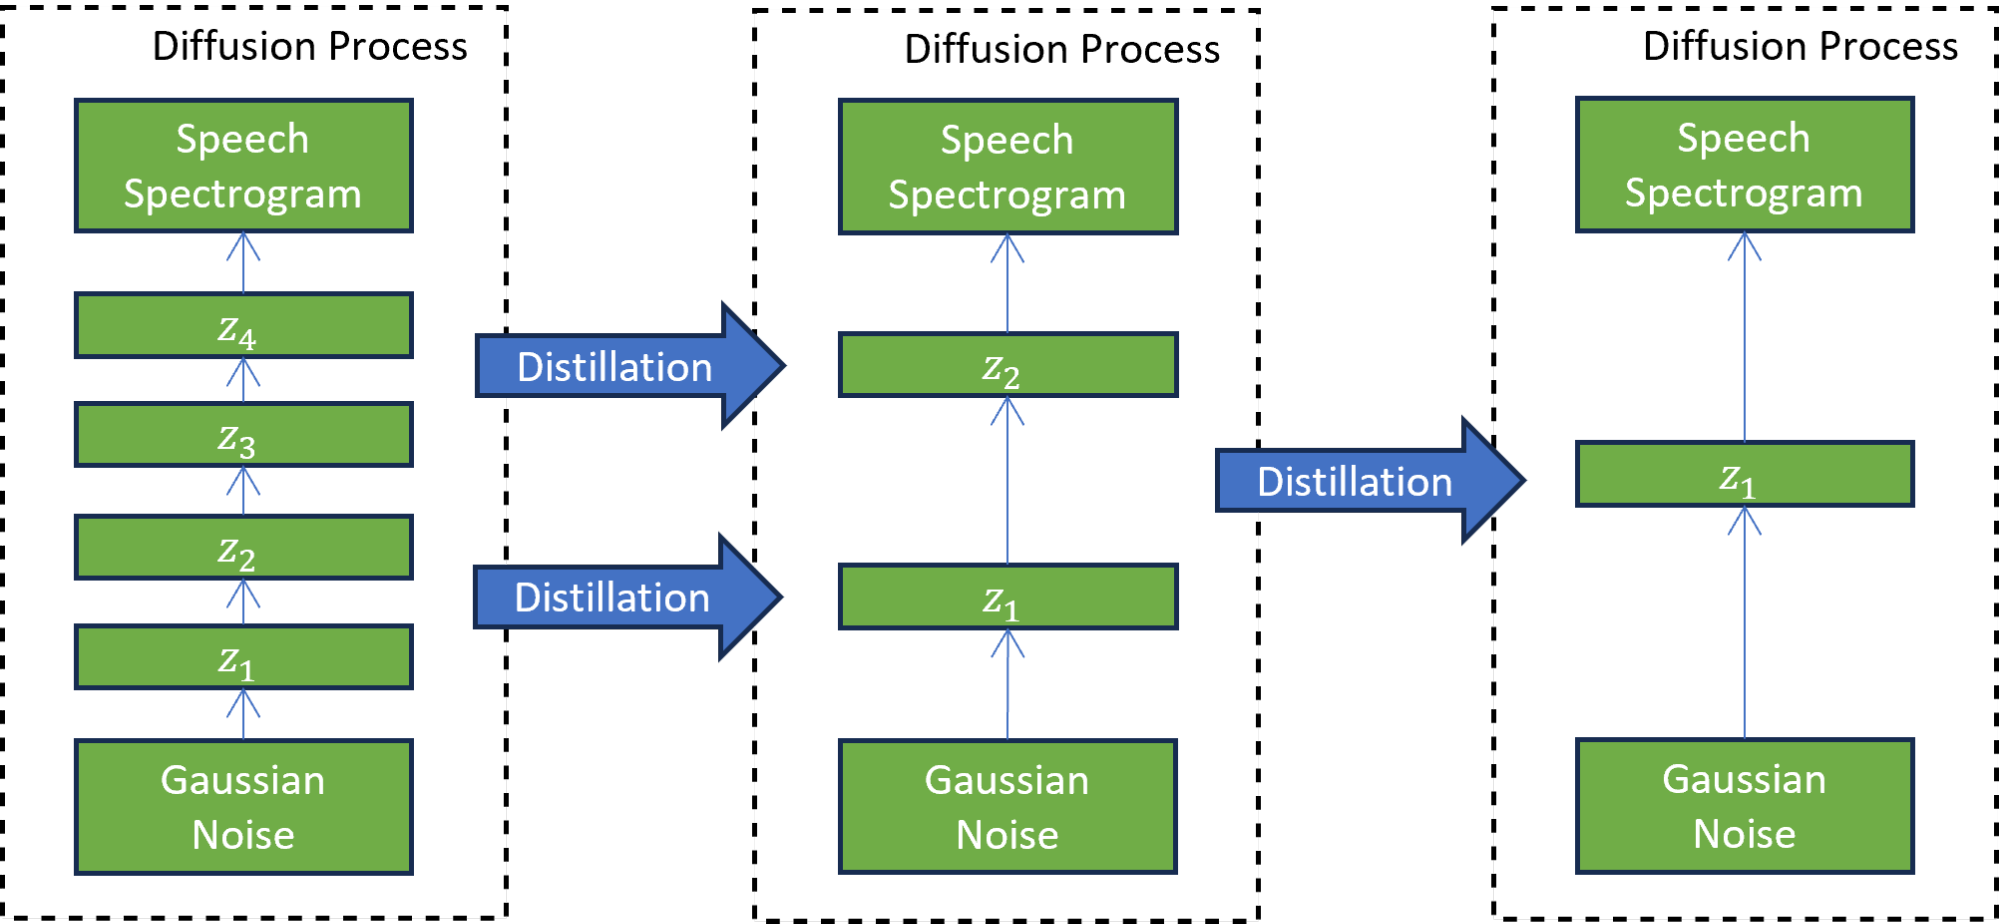 Diagram shows two steps of progressive distillation. In each step, the number of steps required to transform the Gaussian noise to the output speech spectrogram is reduced by a factor of two, from 4 to 2, and then 2 to 1.